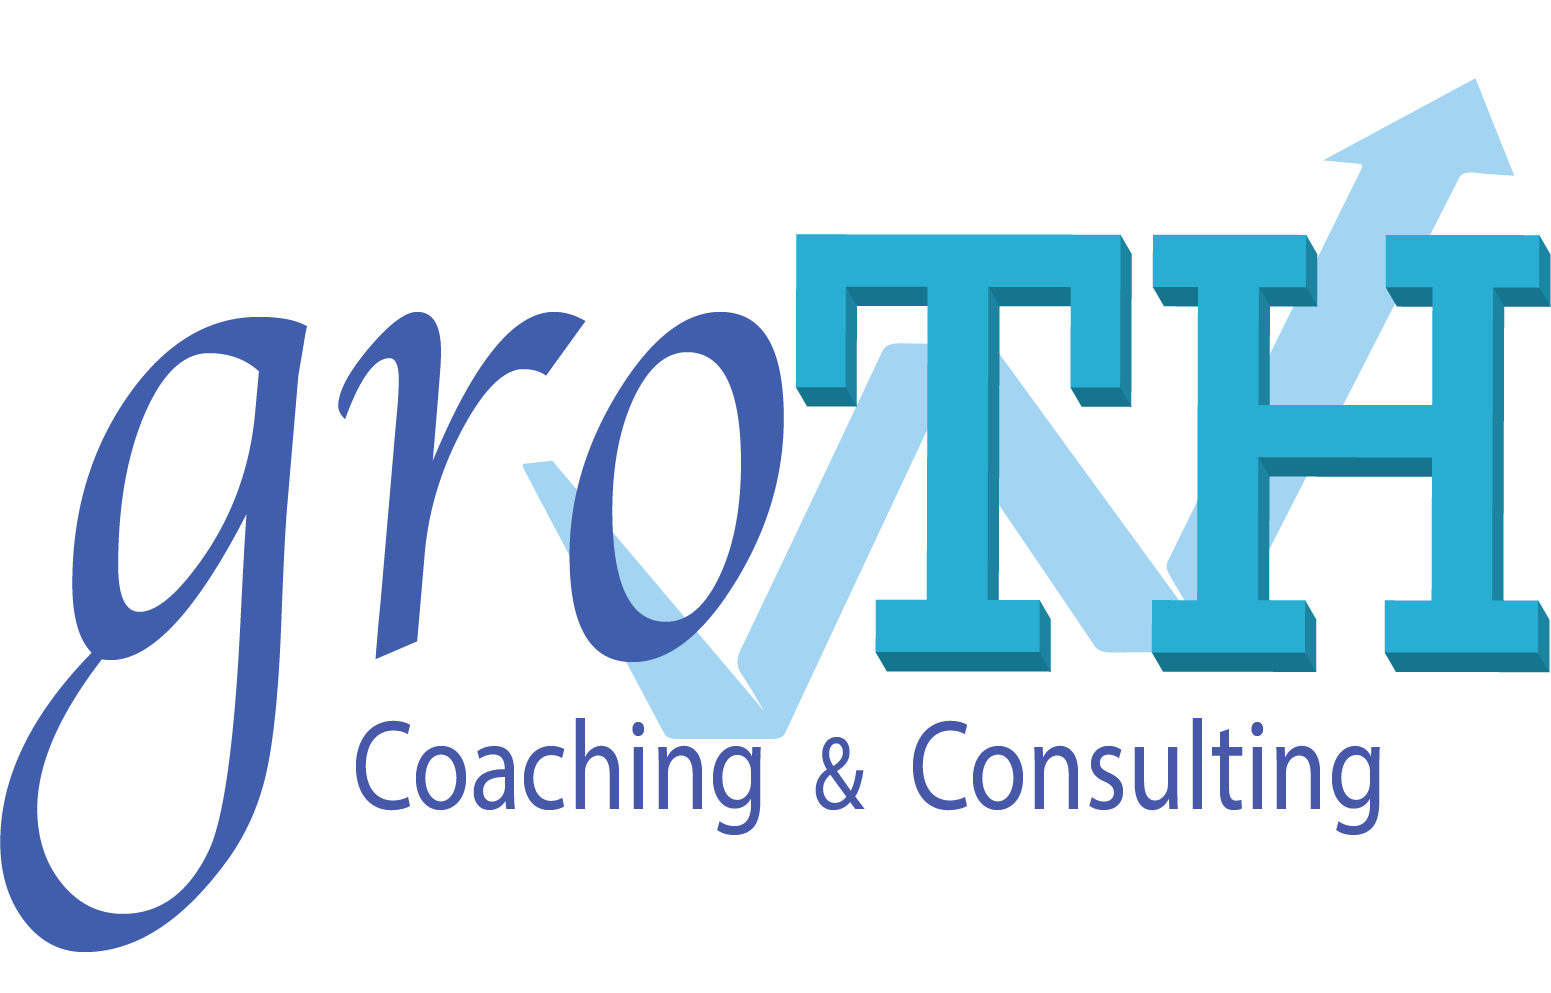 groTH COACHING & CONSULTING